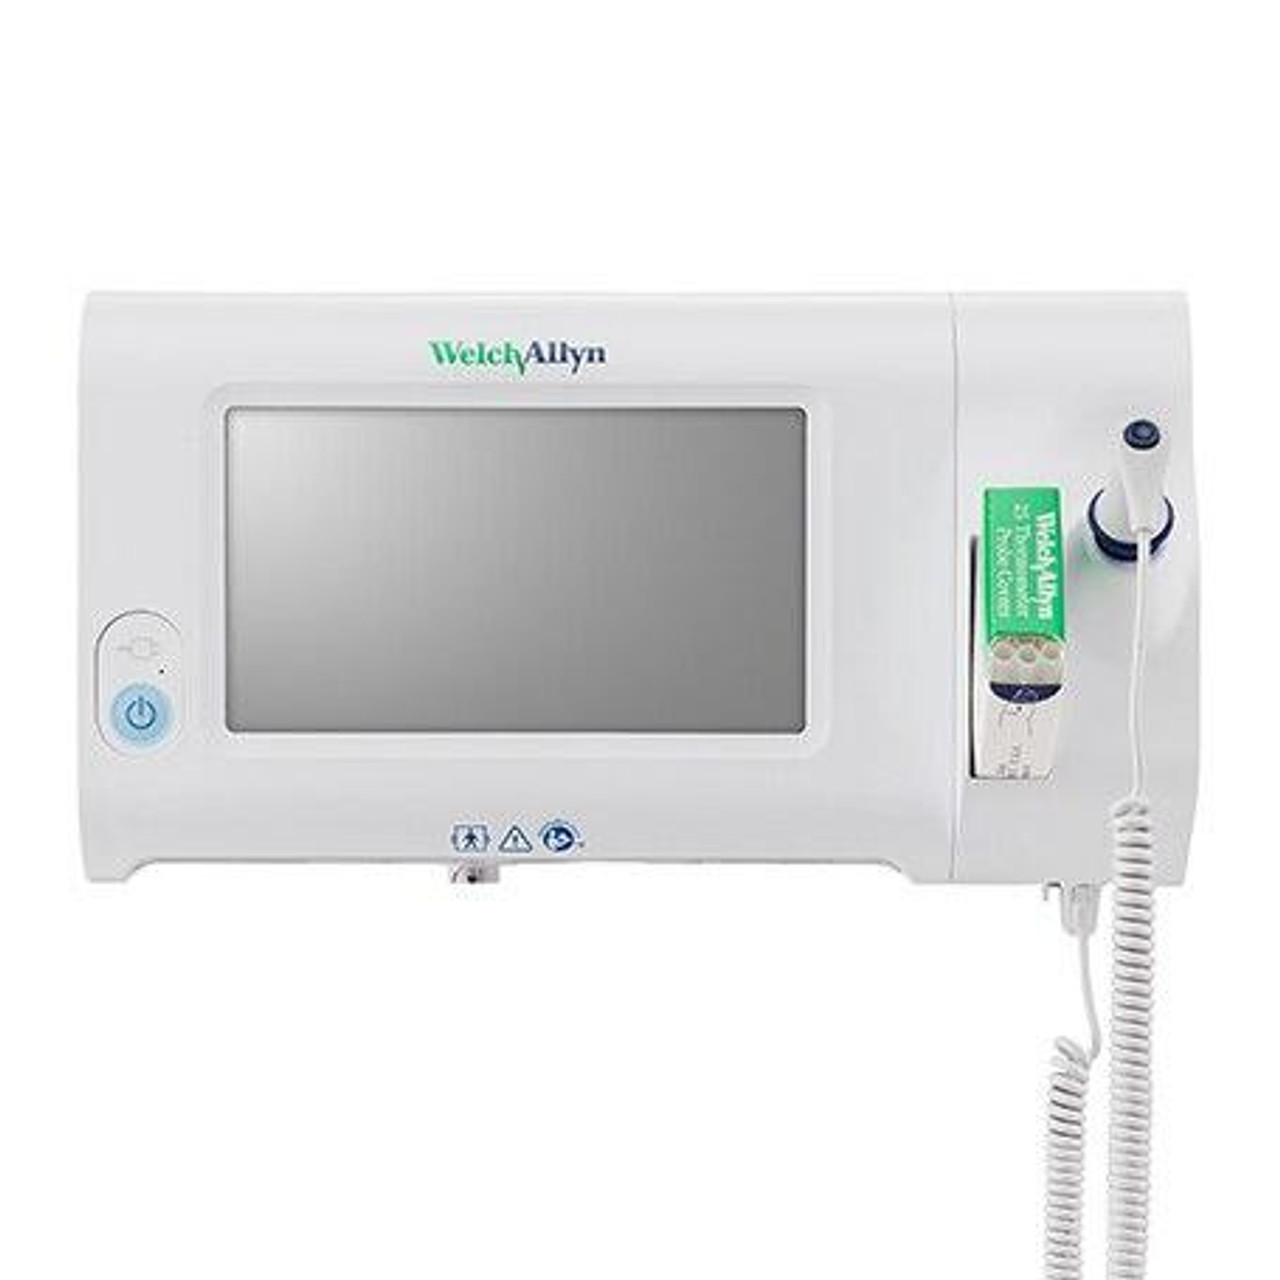 Monitor Plus Spot SureBP With Connex And Suretemp Sign Allyn D Thermometer Welch Vital -